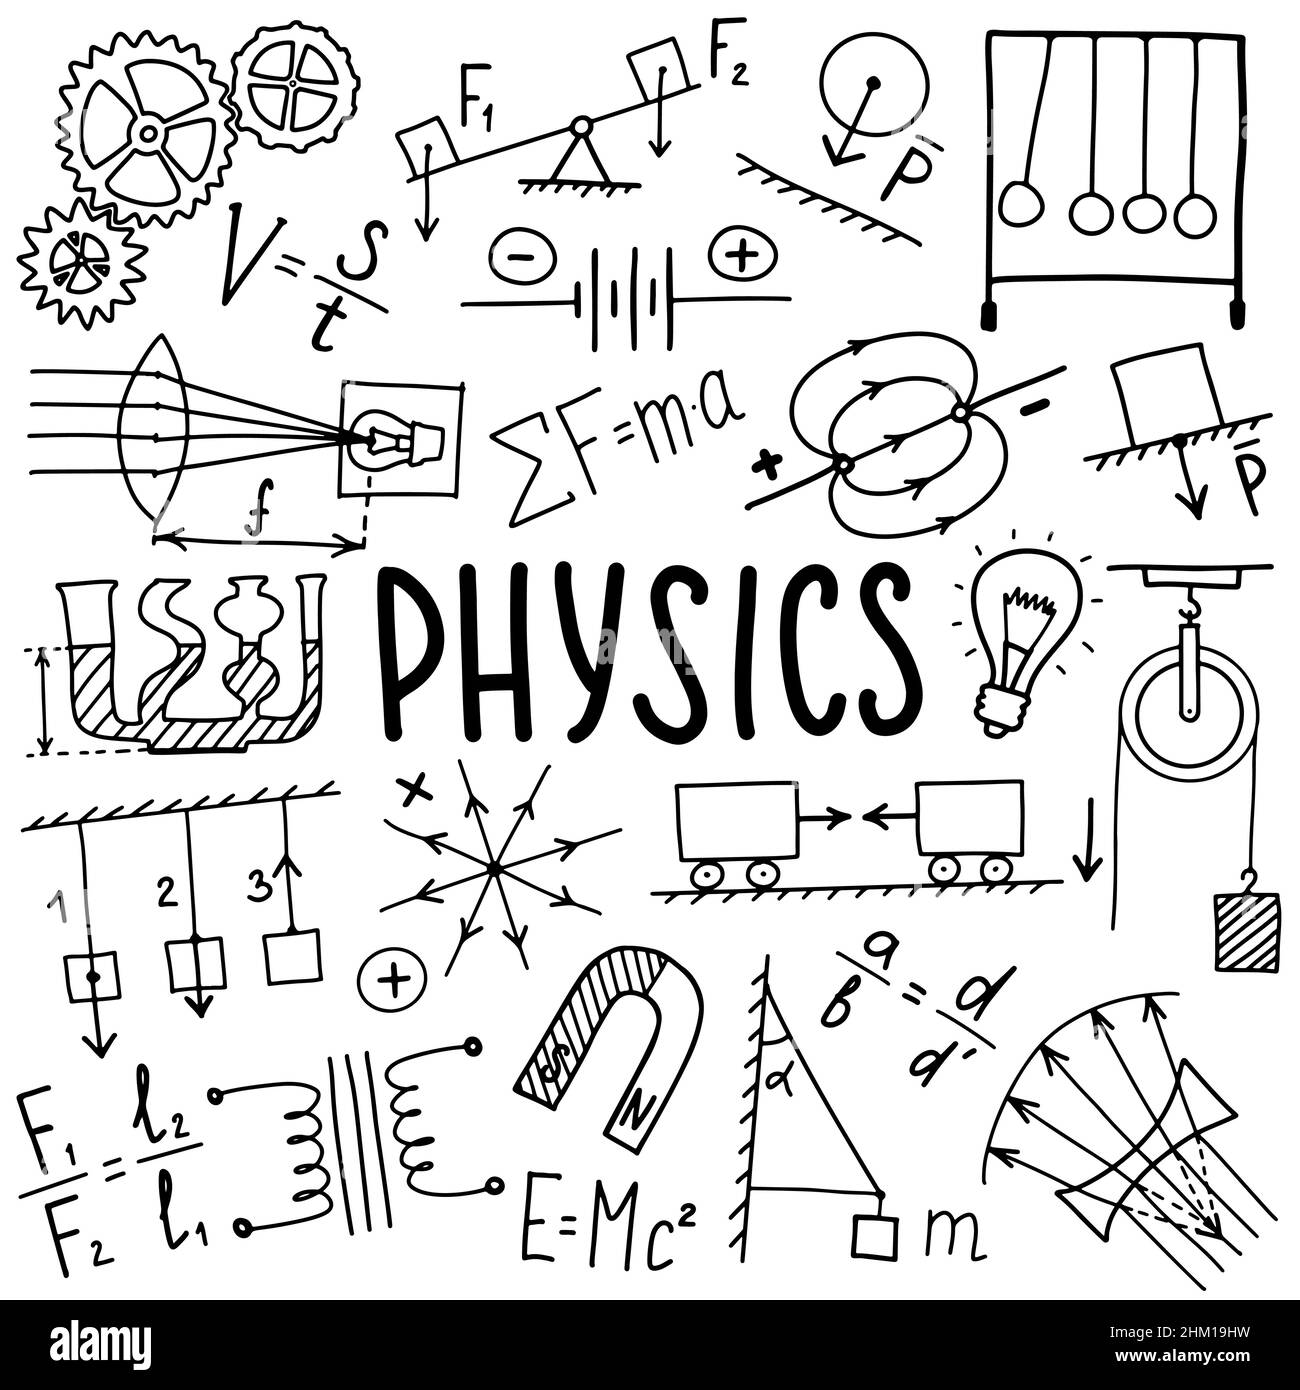 Phisics symbols icon set. Science subject doodle design. Education and study concept. Back to school sketchy background for notebook, not pad Stock Vector